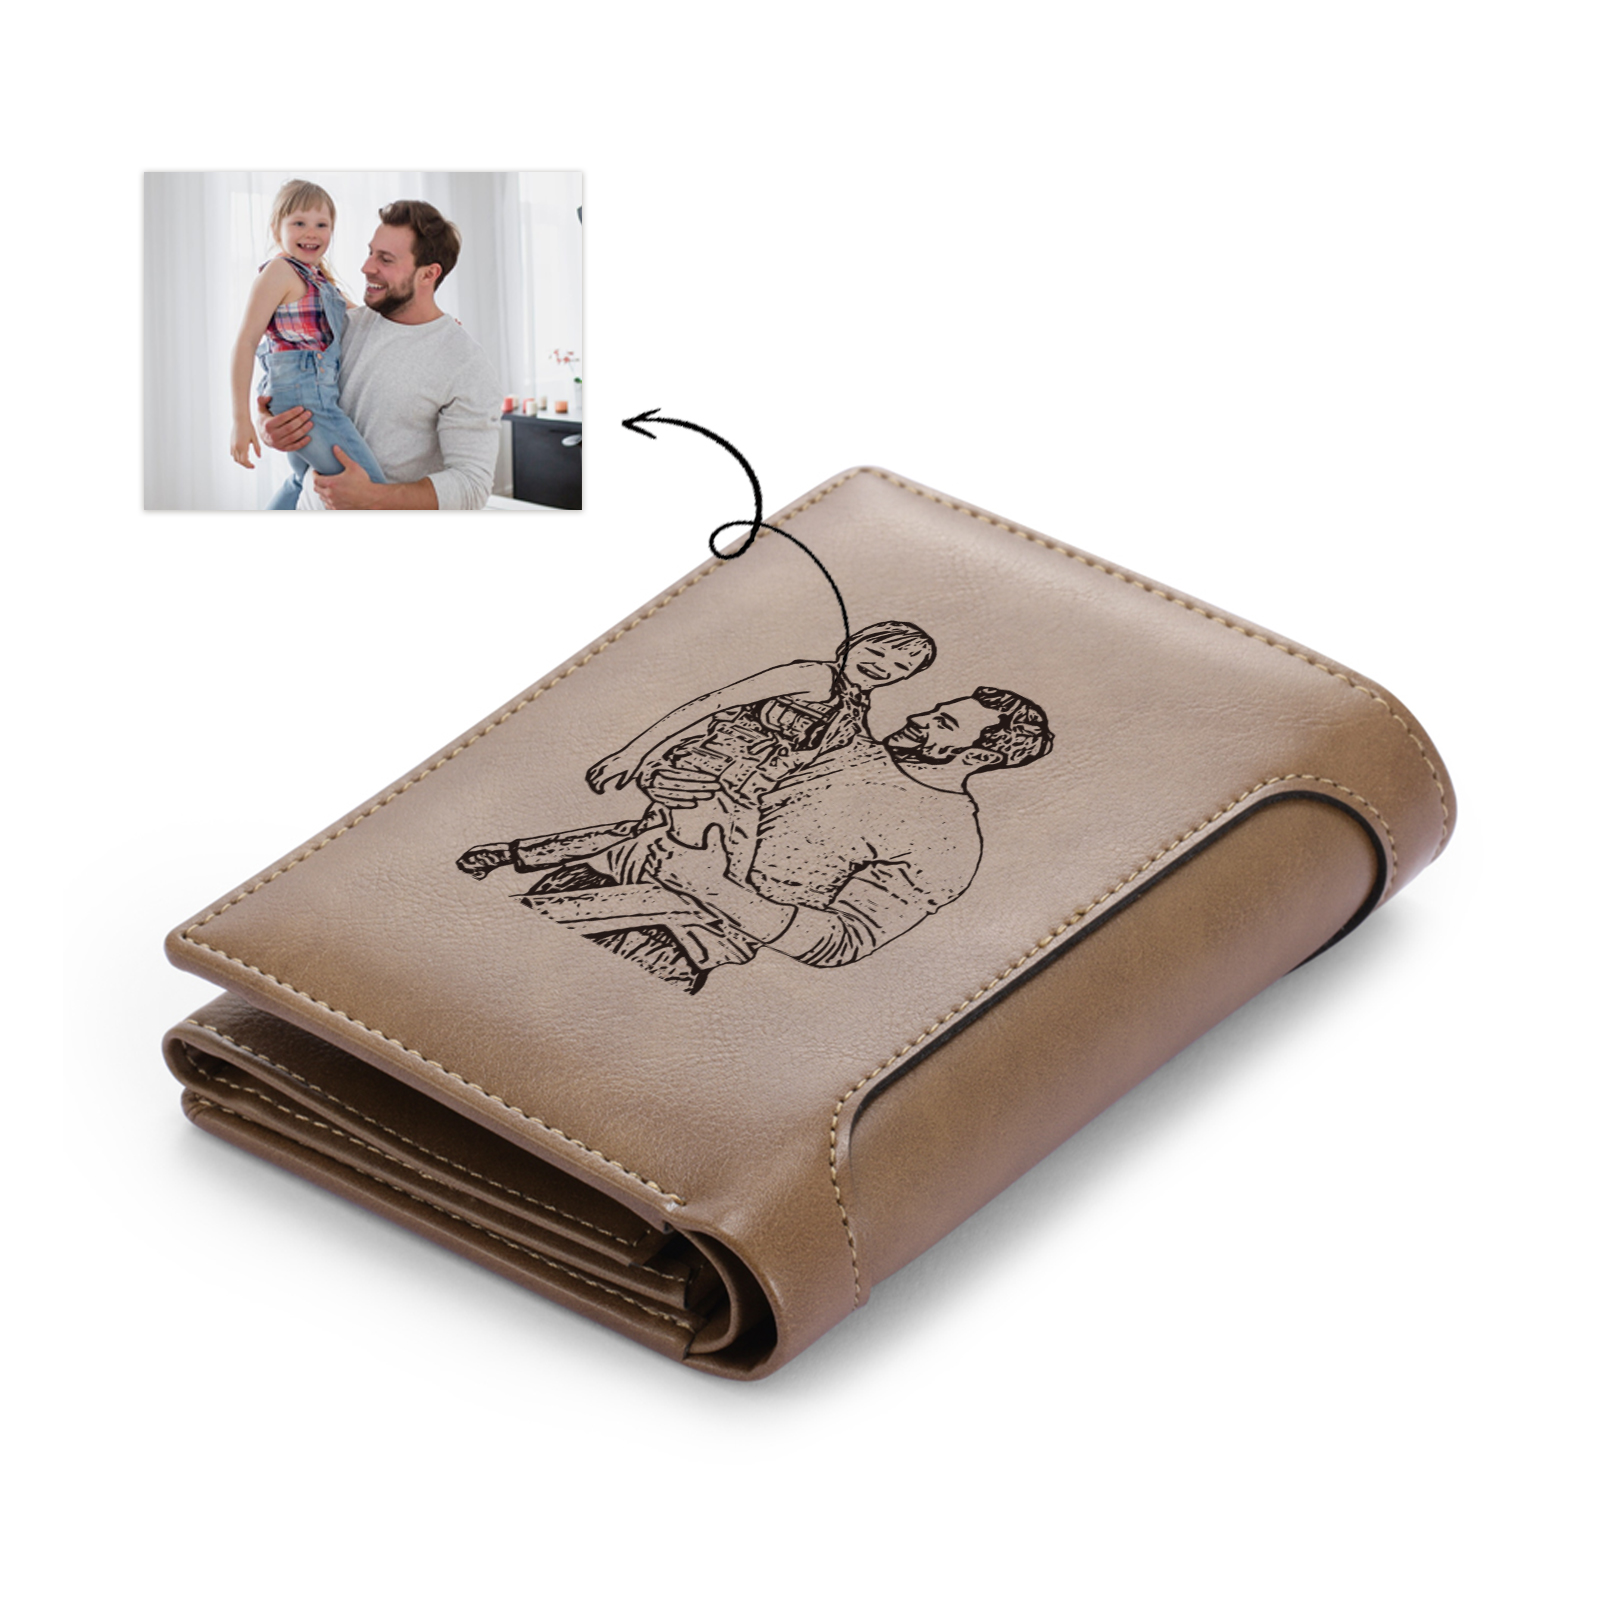 1 Name-Personalized Doll Customized Leather Men's Wallet Customized Name Folding Brown Wallet for Dad